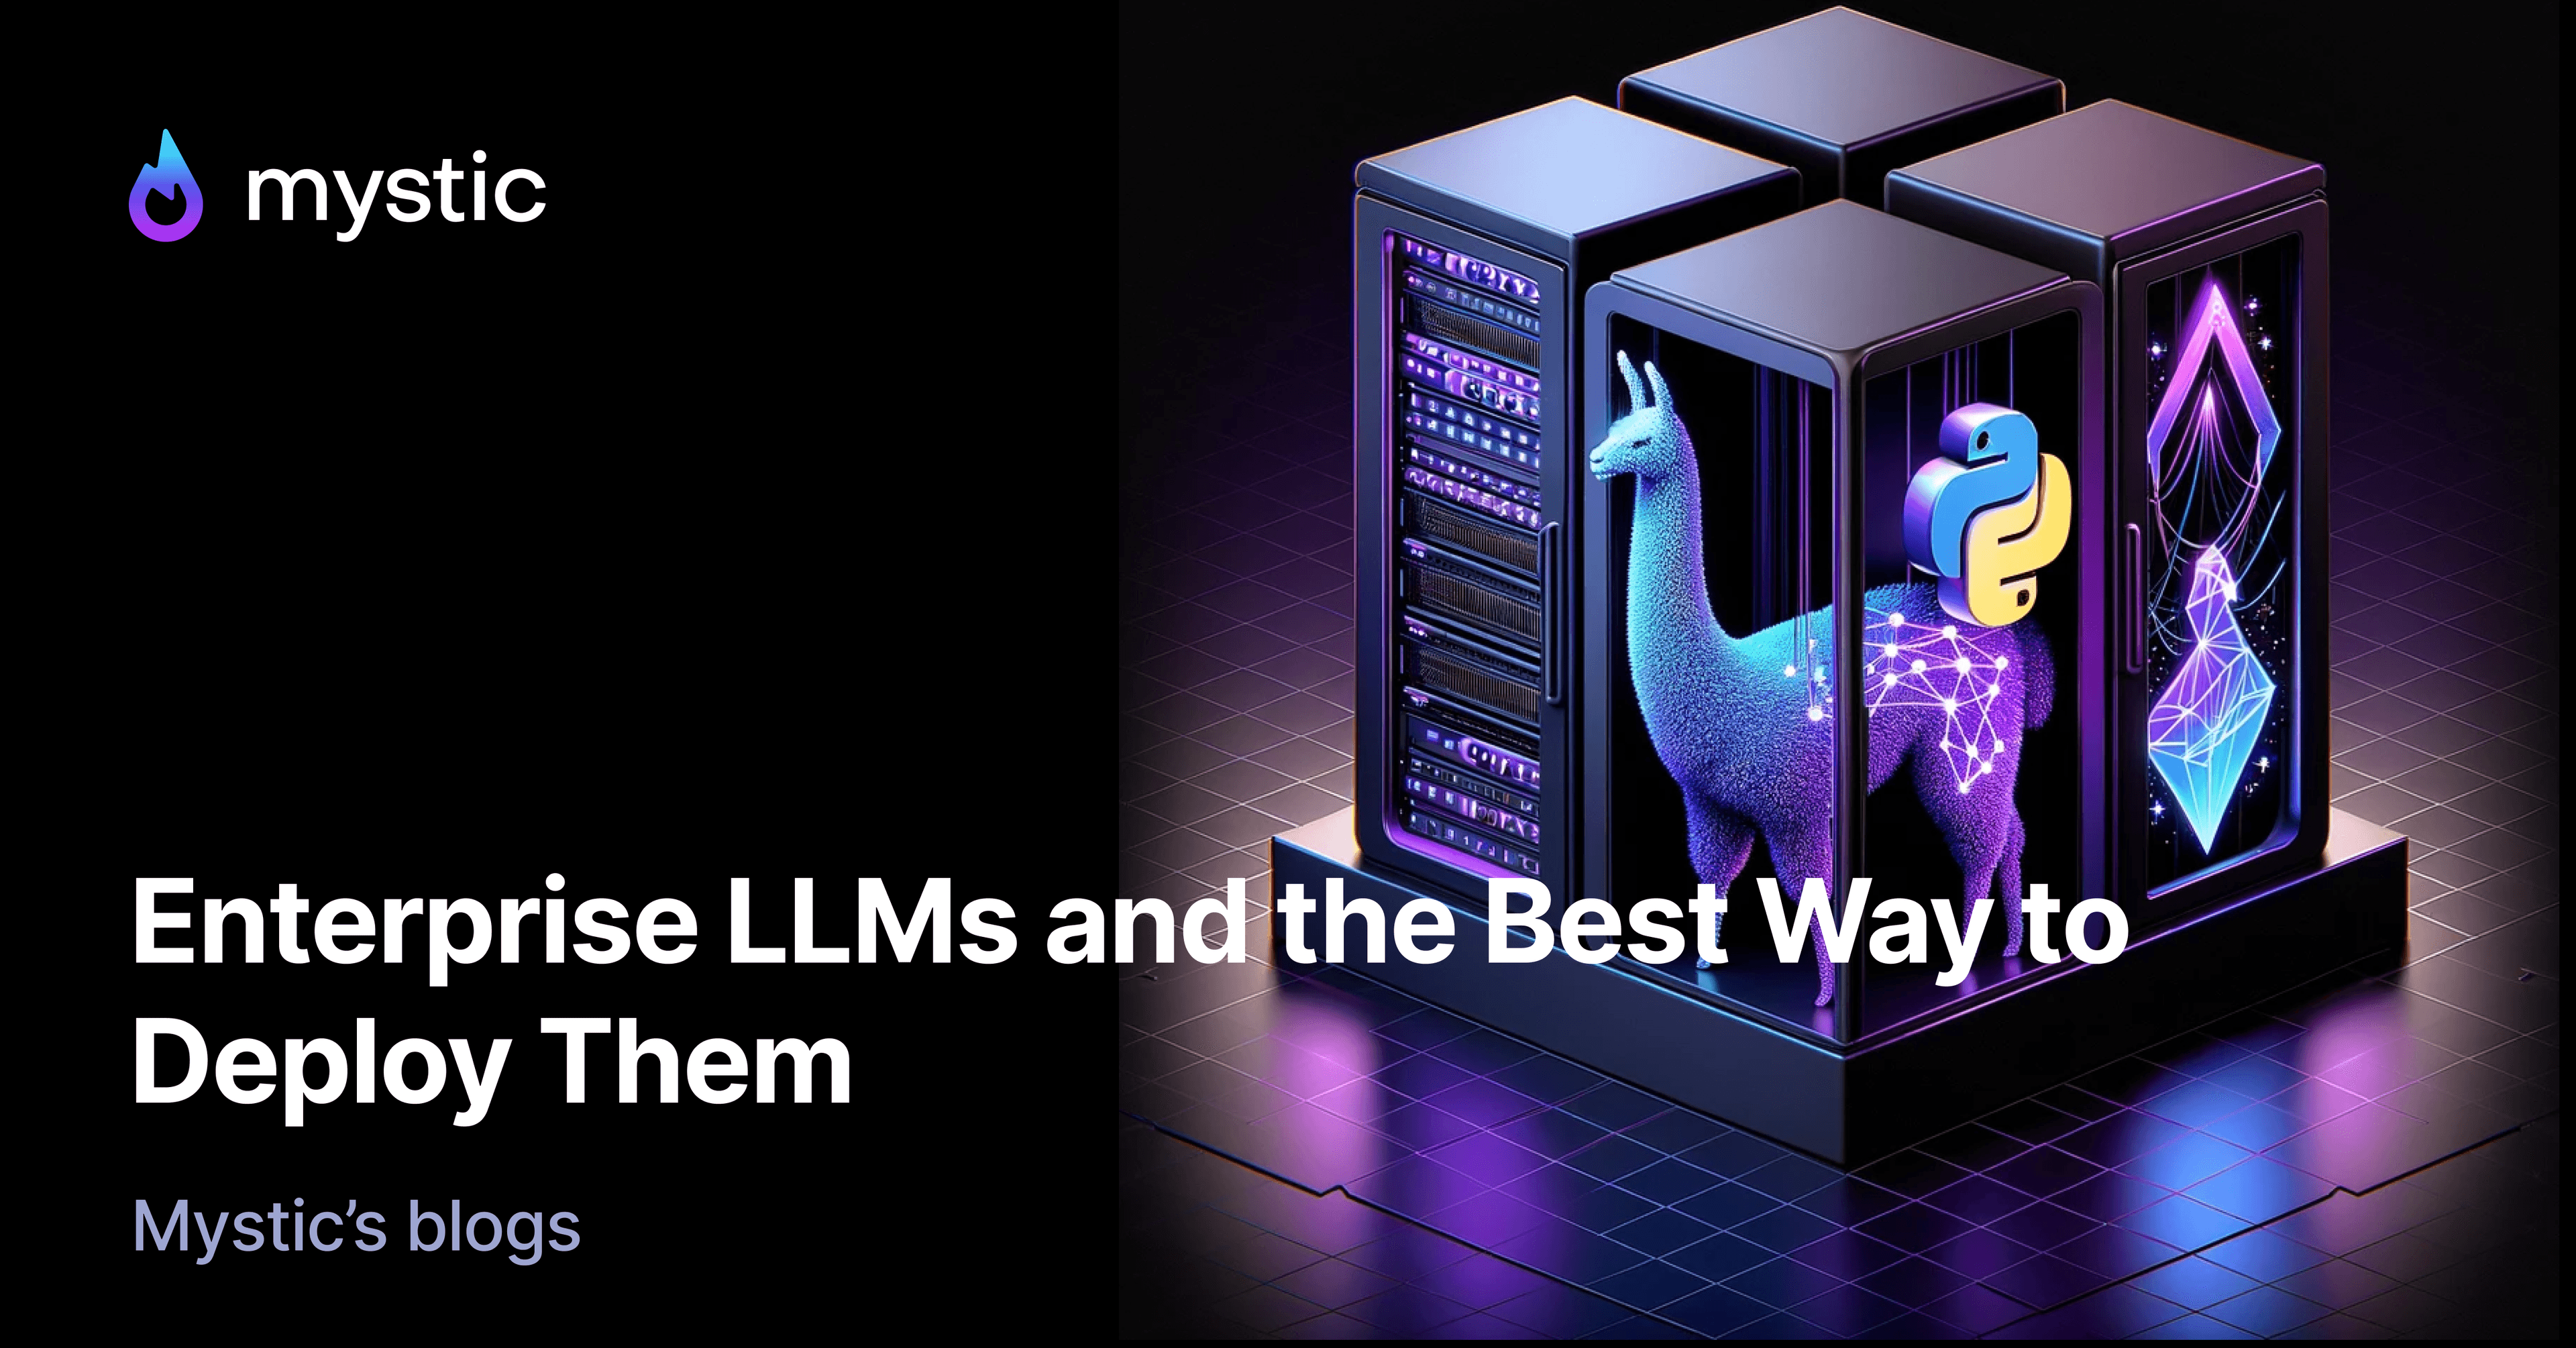 feature image for post with title: Enterprise LLMs and the Best Way to Deploy Them